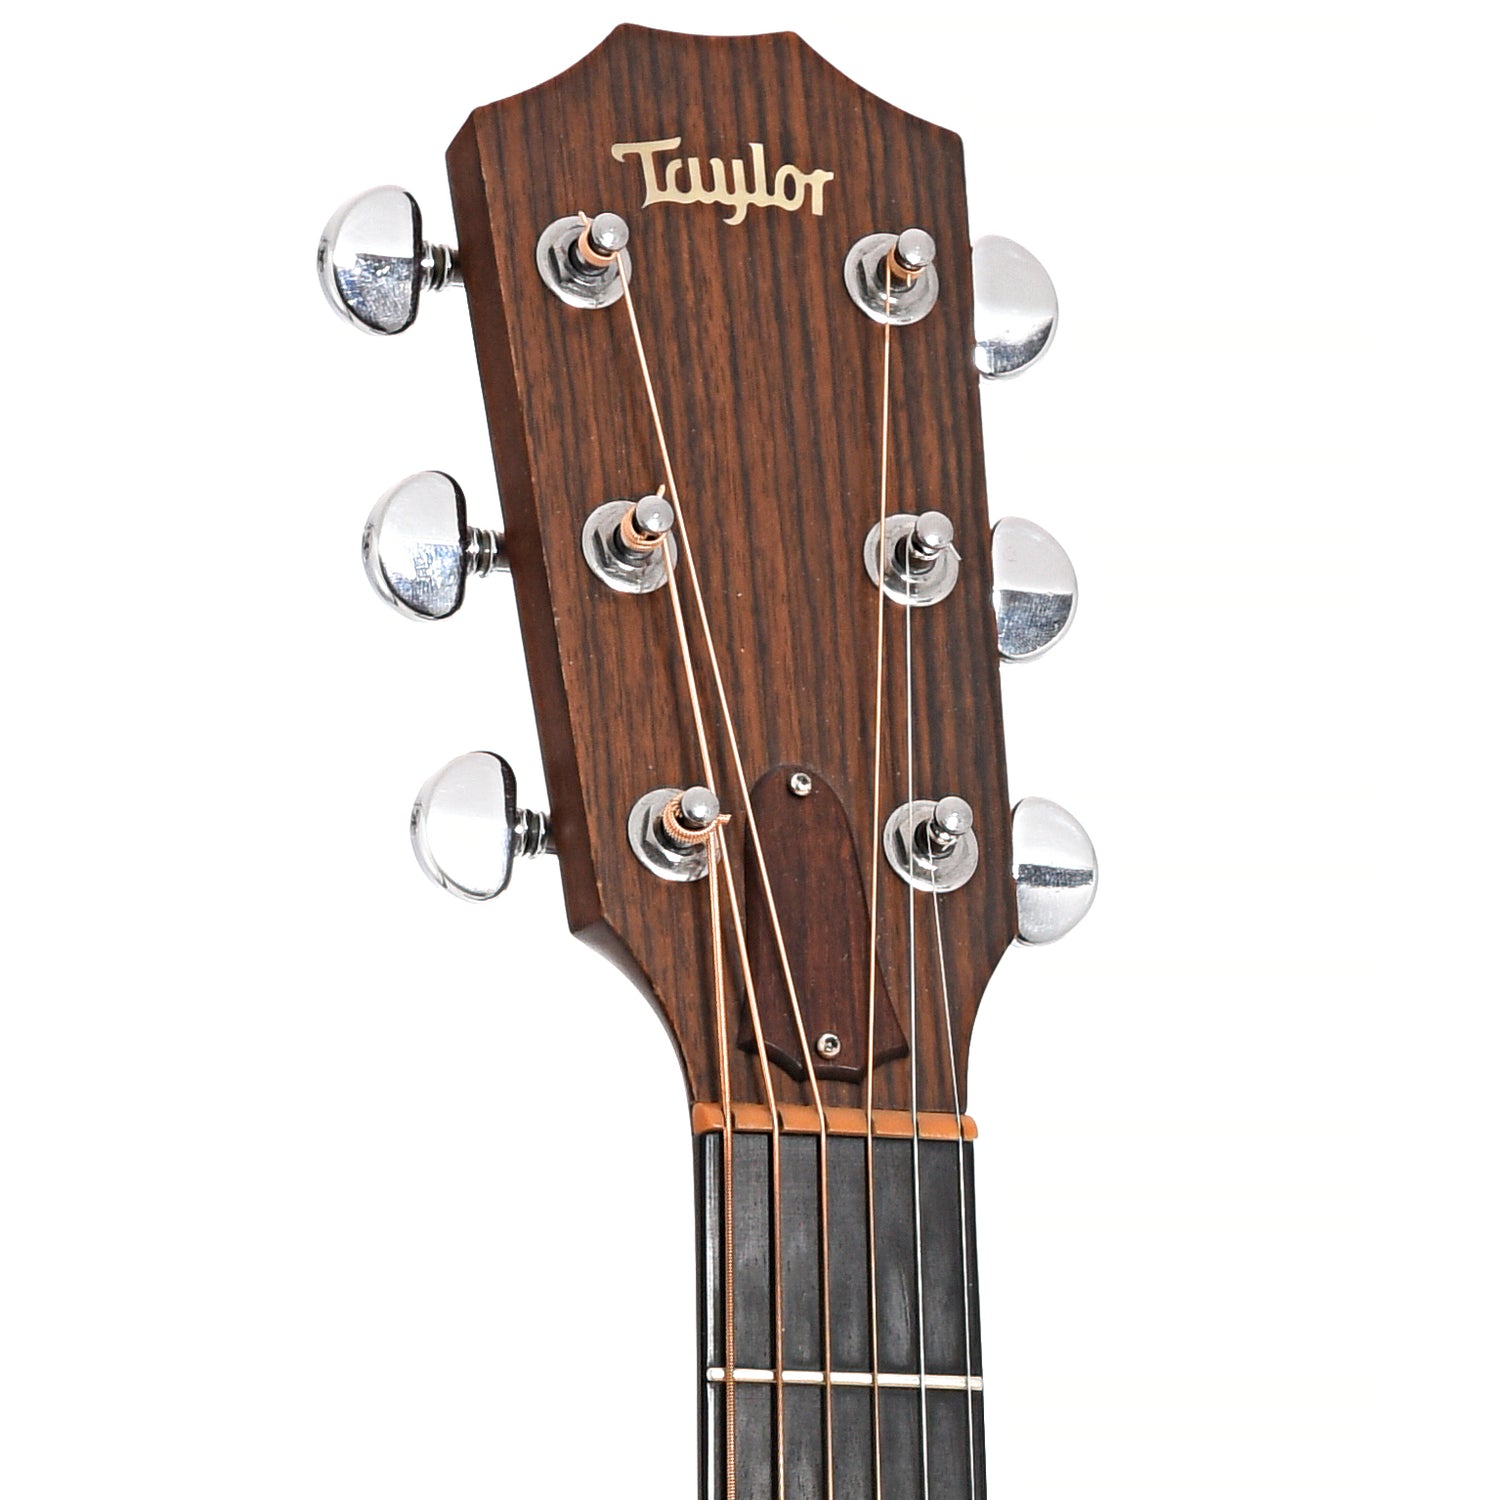 Front headstock of Taylor 710 Acoustic